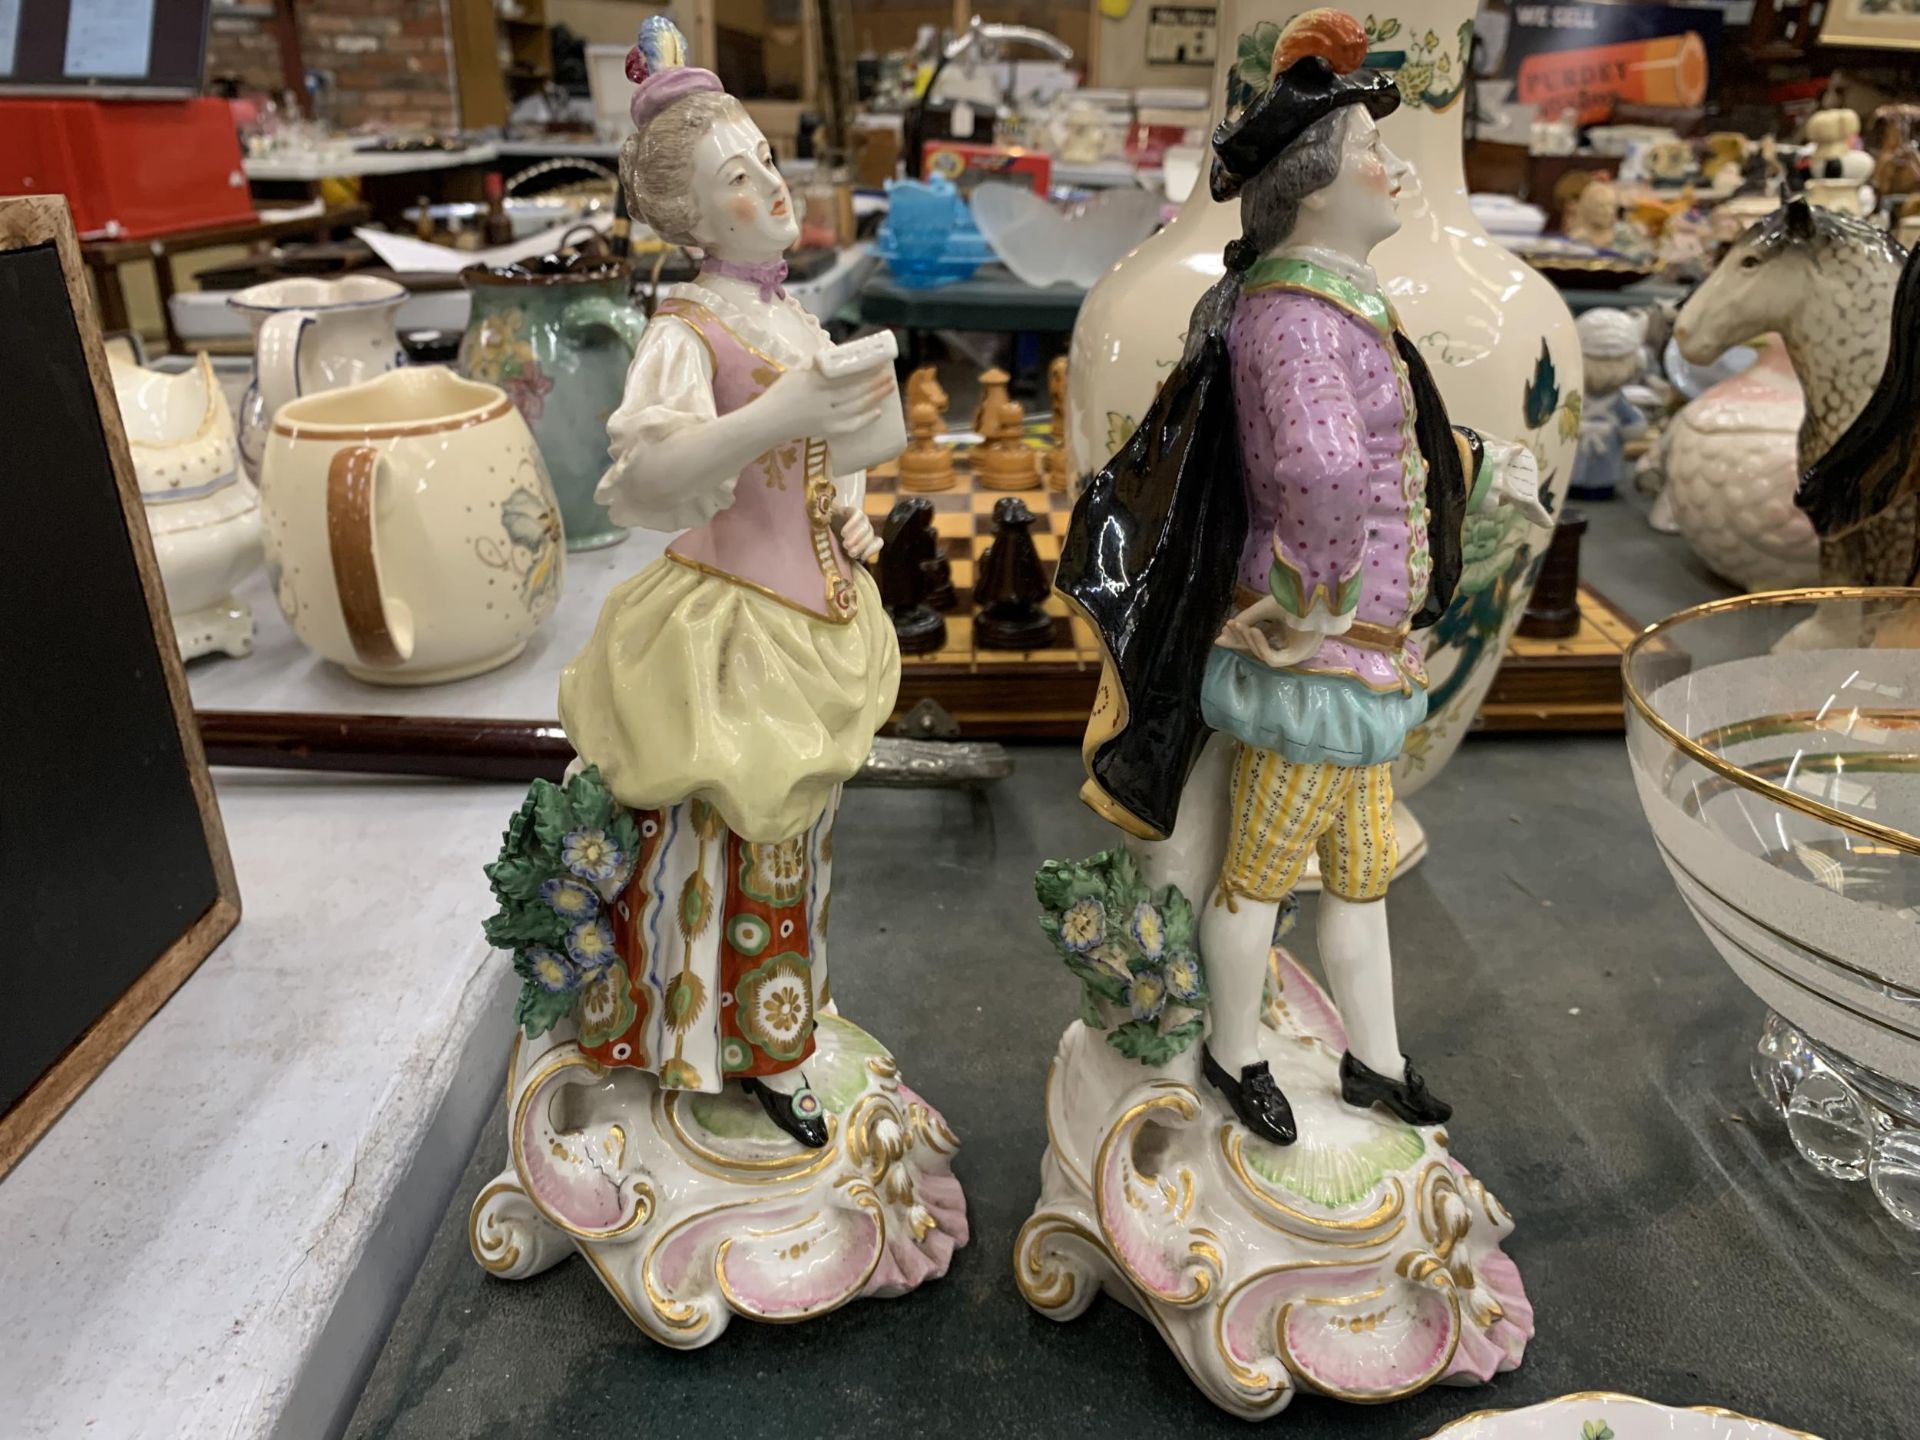 A PAIR OF VINTAGE STAFFORDSHIRE FIGURES - Image 2 of 4